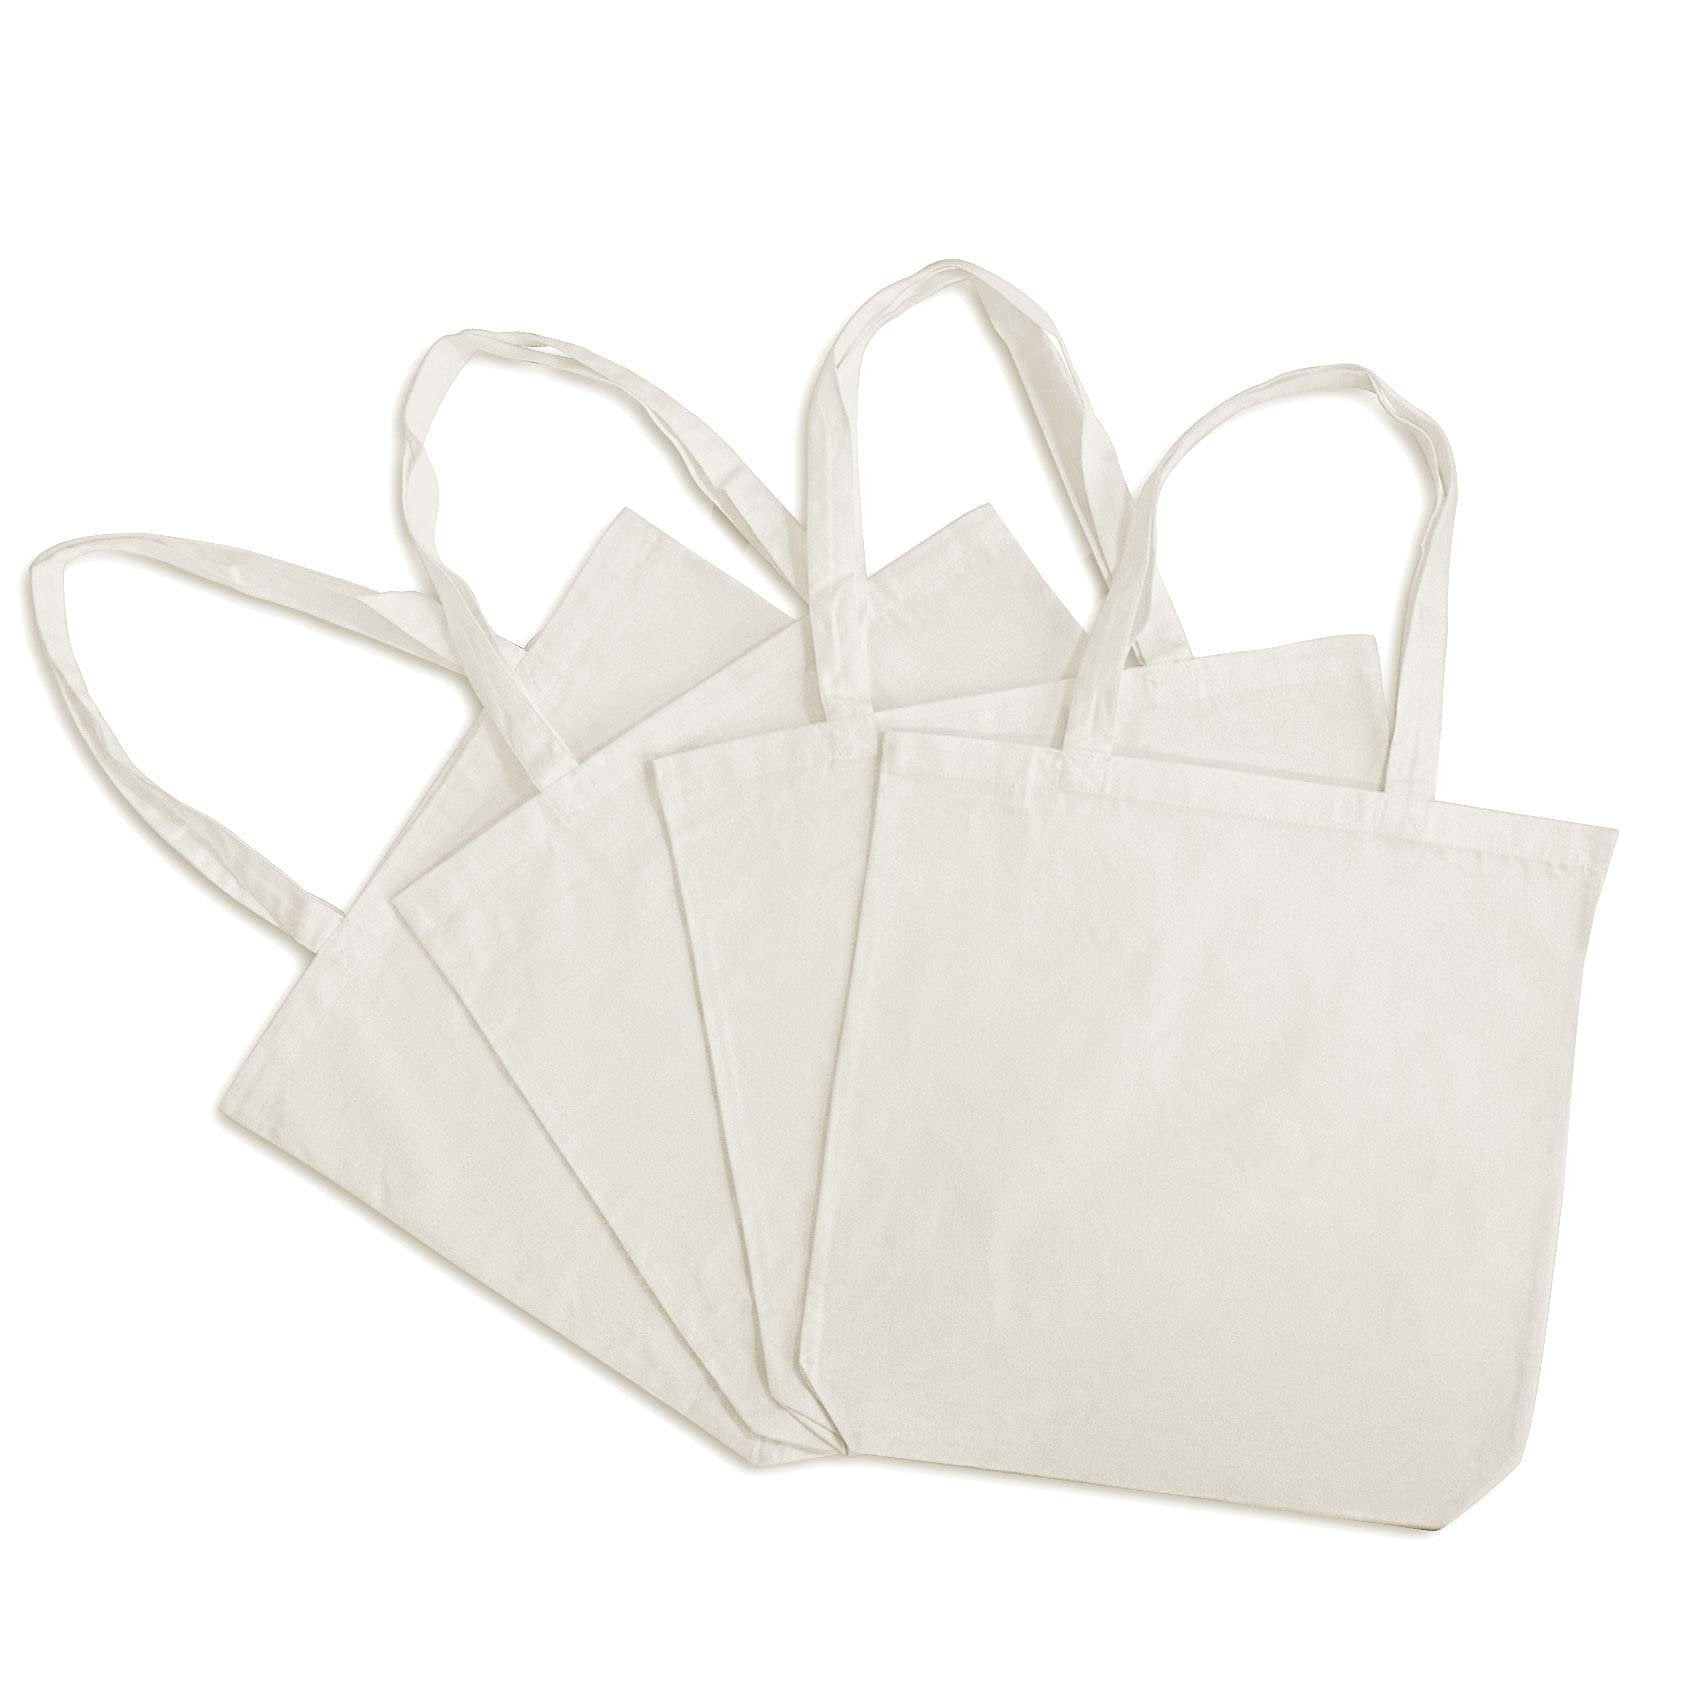 Canvas Bags with Handles - Plain Natural Cotton Totes Made from Organic Fabric, Reusable Cloth Shopping Bags for Grocery, Market, Beach, Pool, Gifts, DIY, Washable & Eco Friendly 4 Pcs - 15.7x3.3x15.7